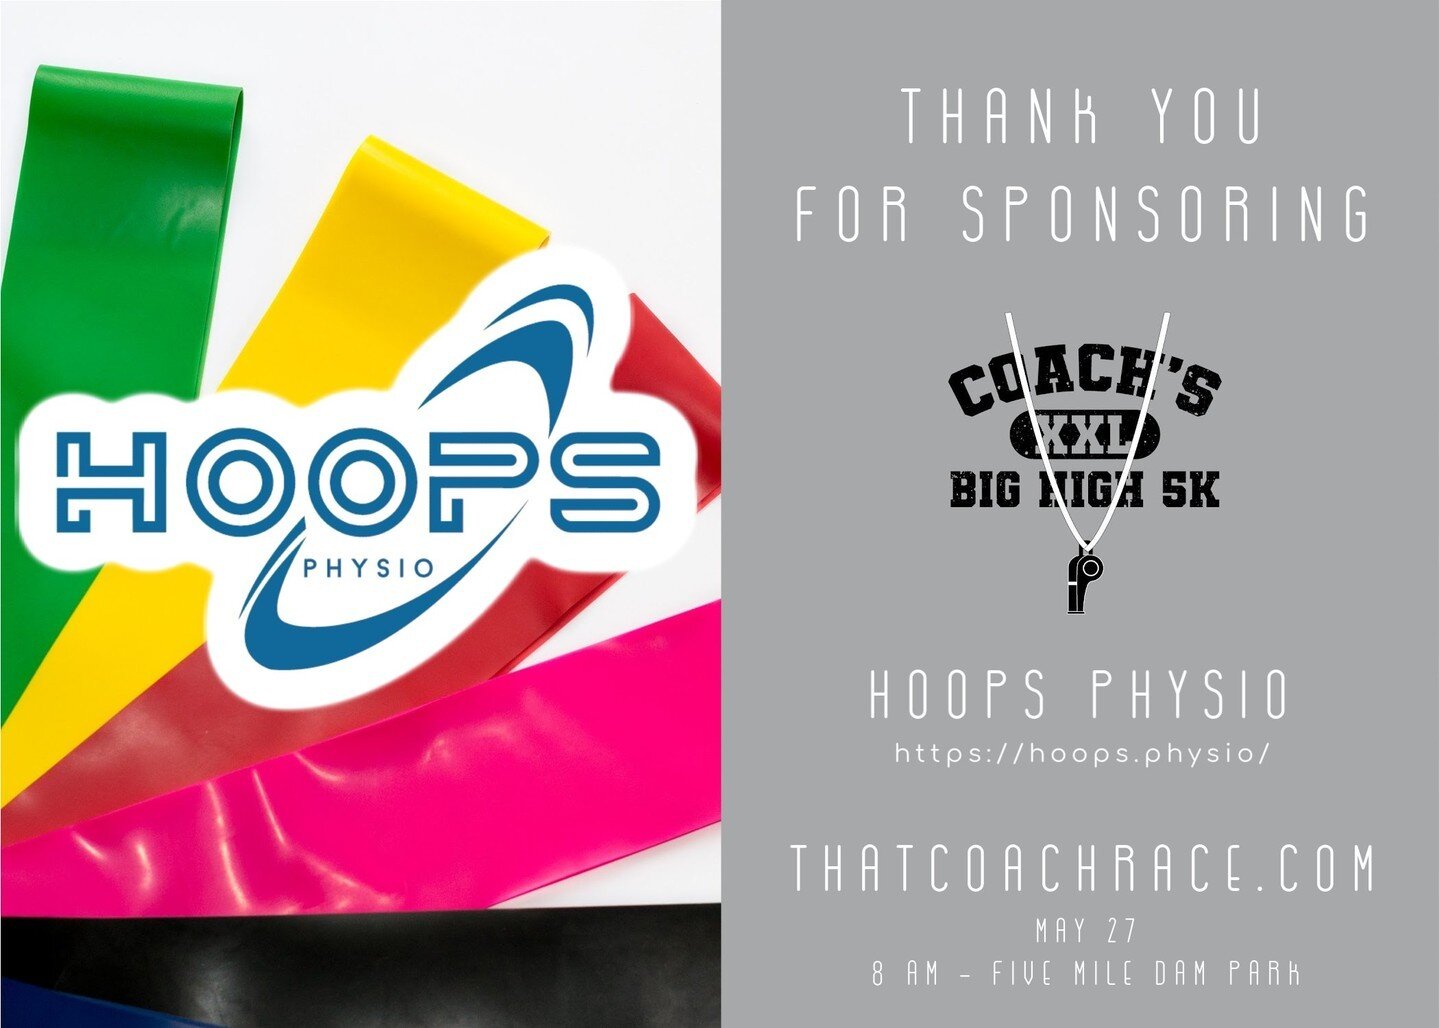 Thank you to Hoops Physio for sponsoring Coach's Big High 5K! Dr. Thaddeus Brown and his team are committed to working with people who are trying to return to competitive or recreational sports or an active lifestyle.  Set up a discovery call at http